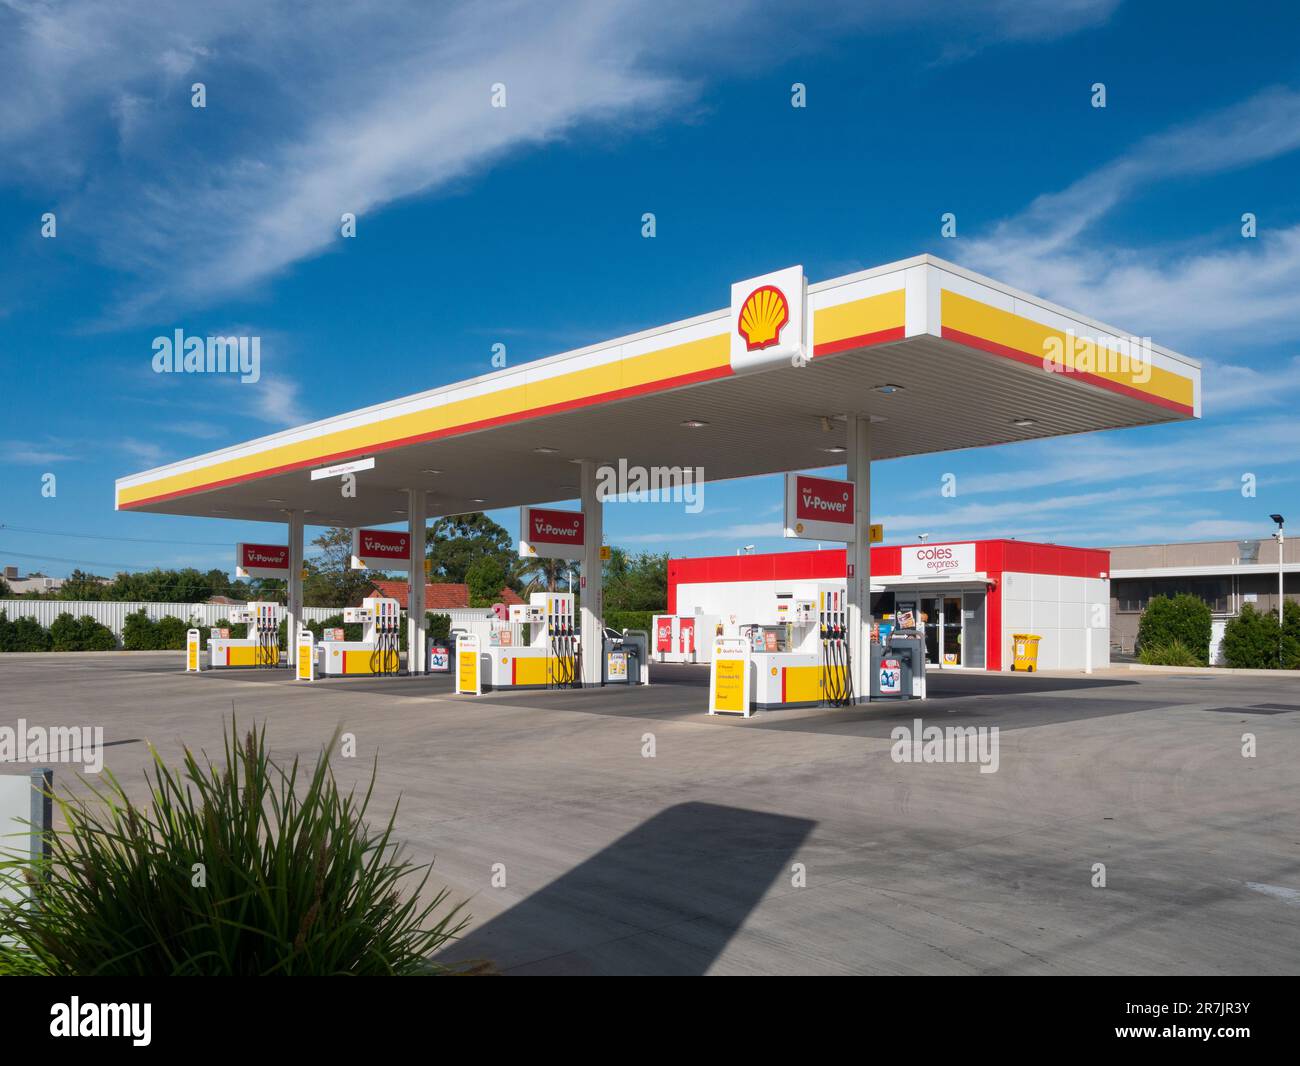 Exterior view of a Shell service station with blue sky and clouds in South Australia, Australia. Stock Photo